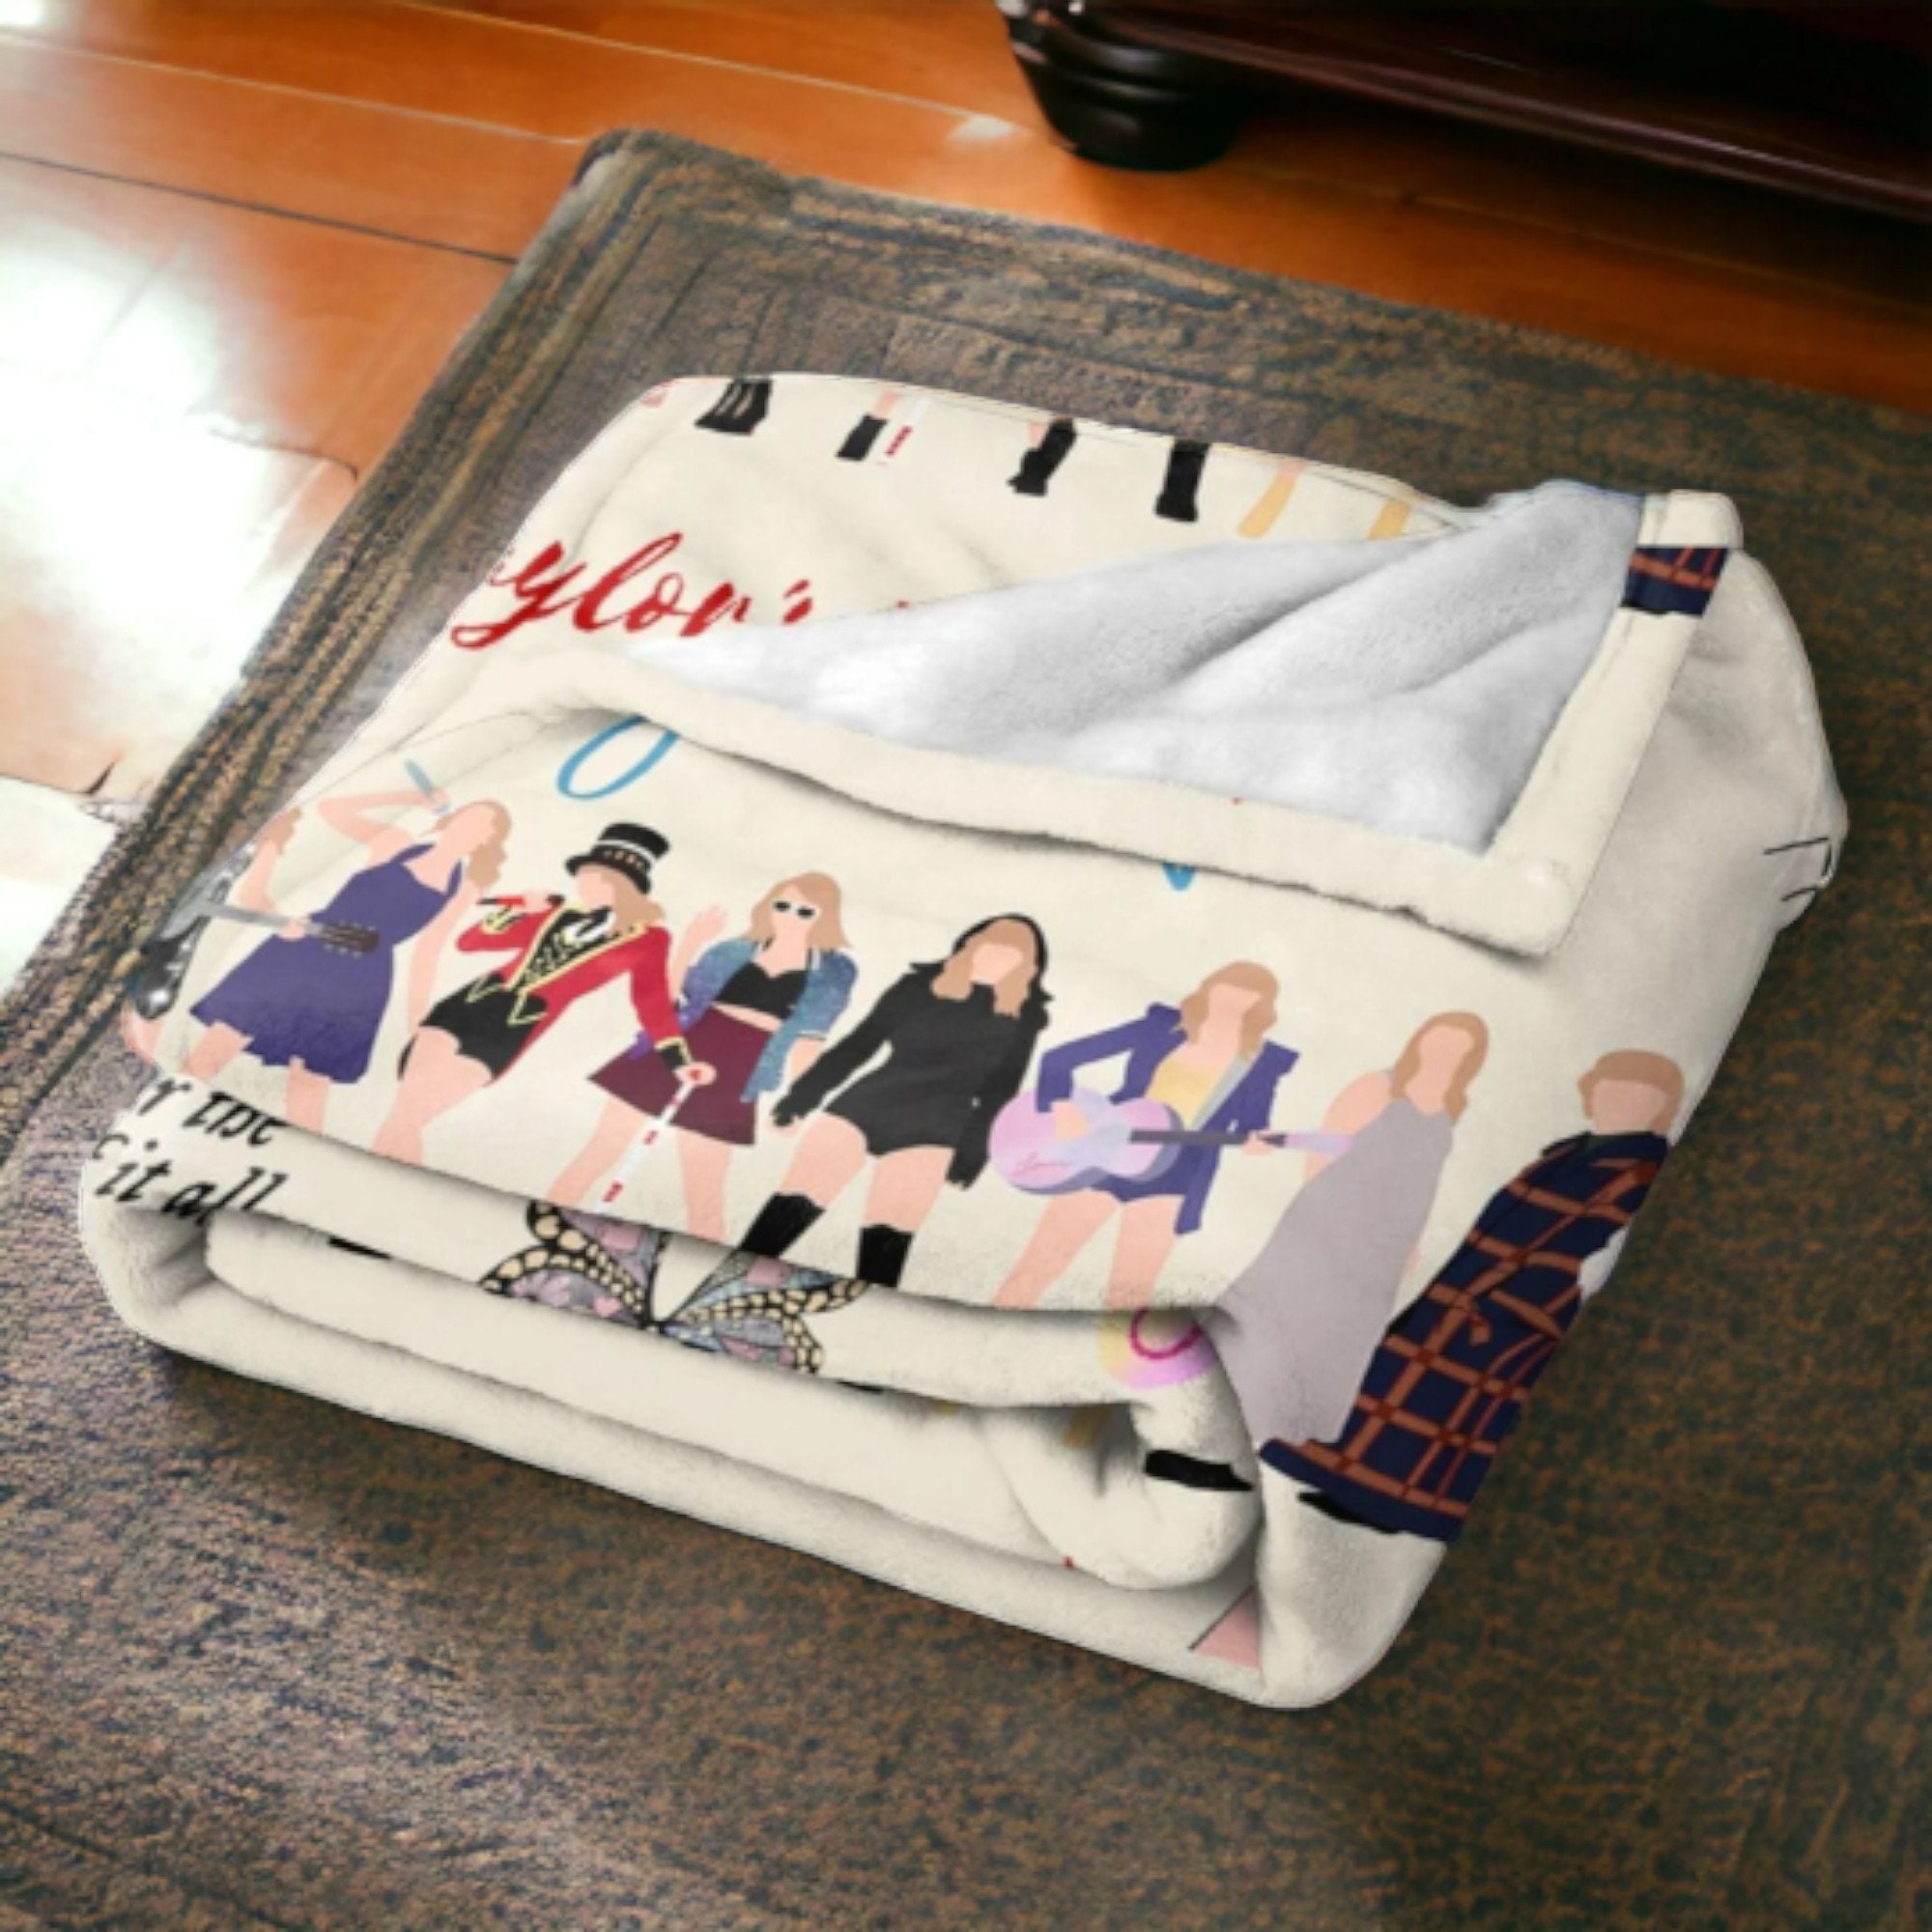 Taylor Blanket - taylor version Merchandise - Cute Winter Blanket - 1989 Tour Inspired Gift for Her